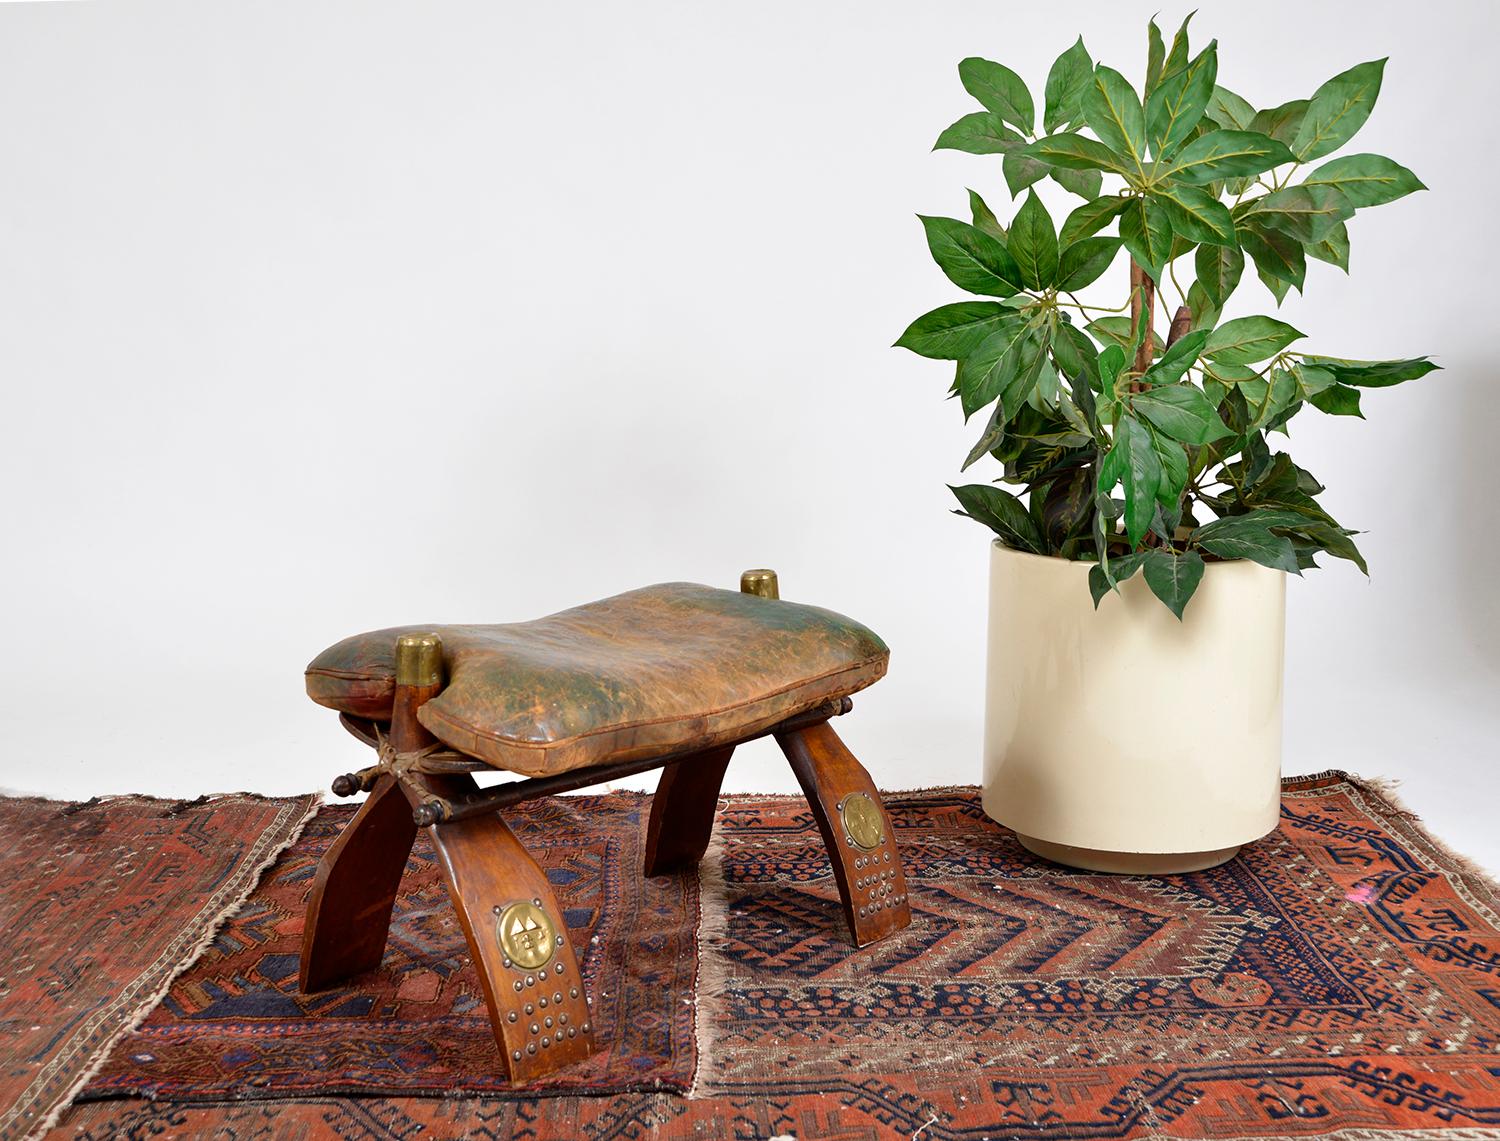 Hand-Crafted 60s Egyptian Leather Camel Saddle Stool Footstool Ottoman Pouffe Middle Eastern